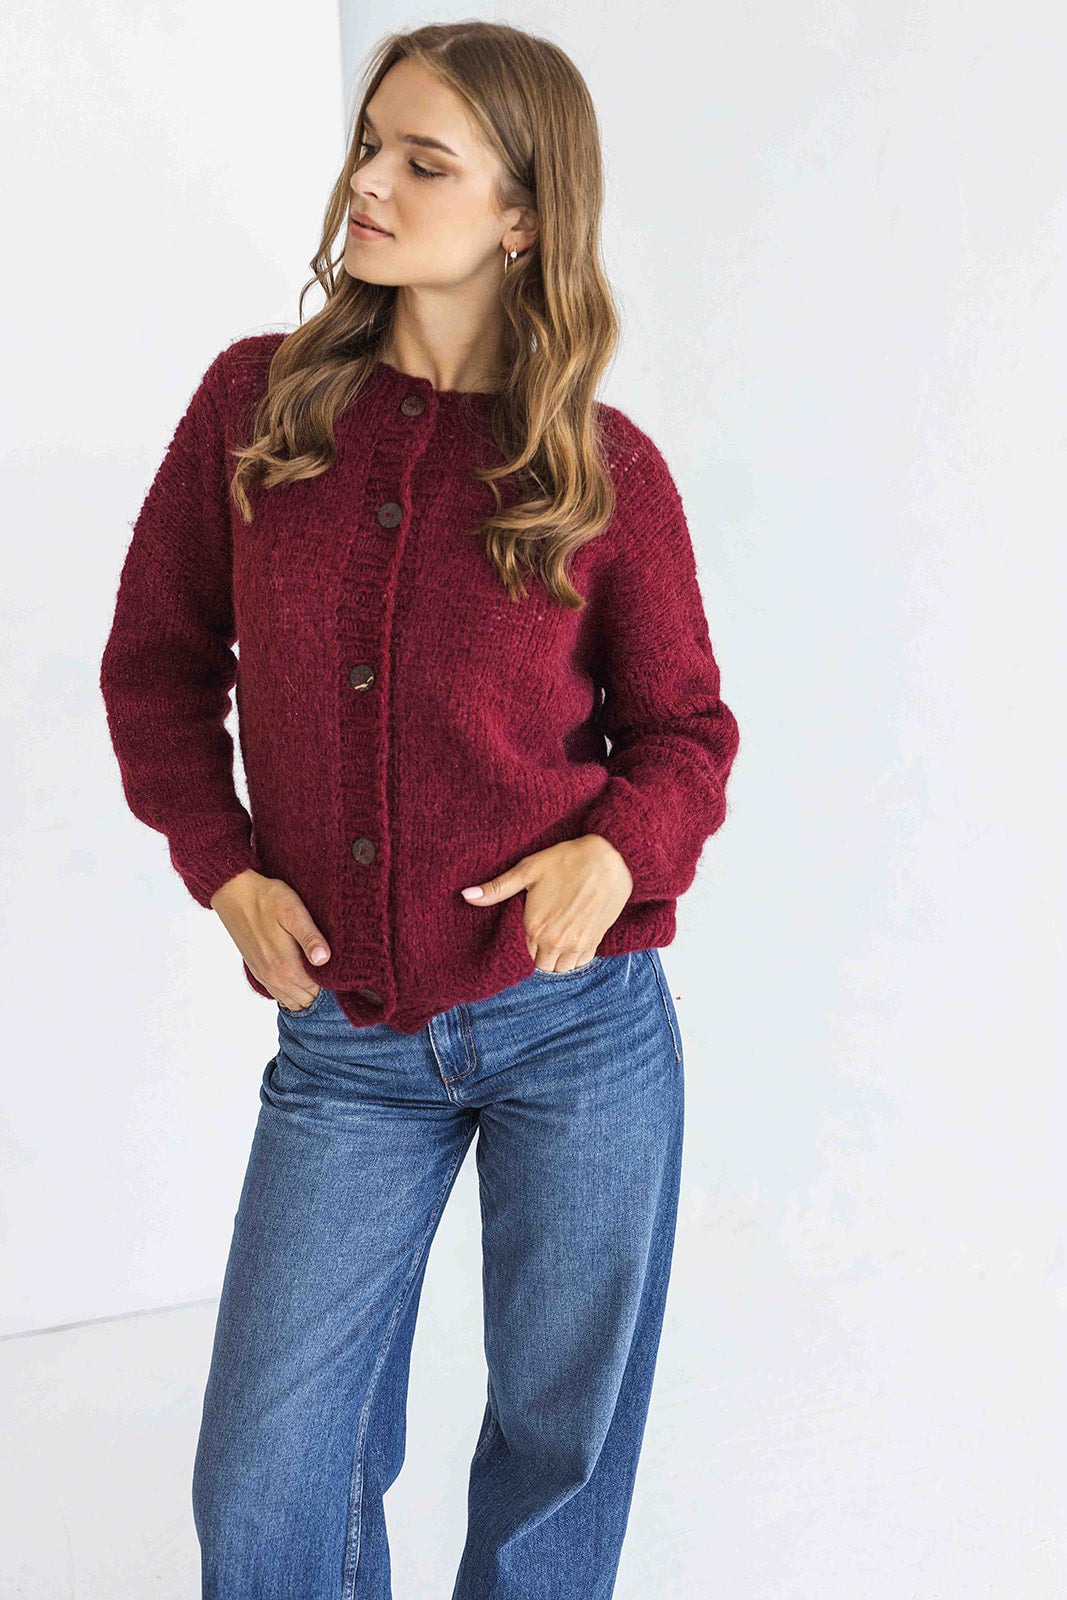 Bordeaux Alpaca Wool Cardigan With Buttons, Burgundy Red Cable Knit Lightweight Sweater, Slightly Oversized Minimalist Classy Women Gilet